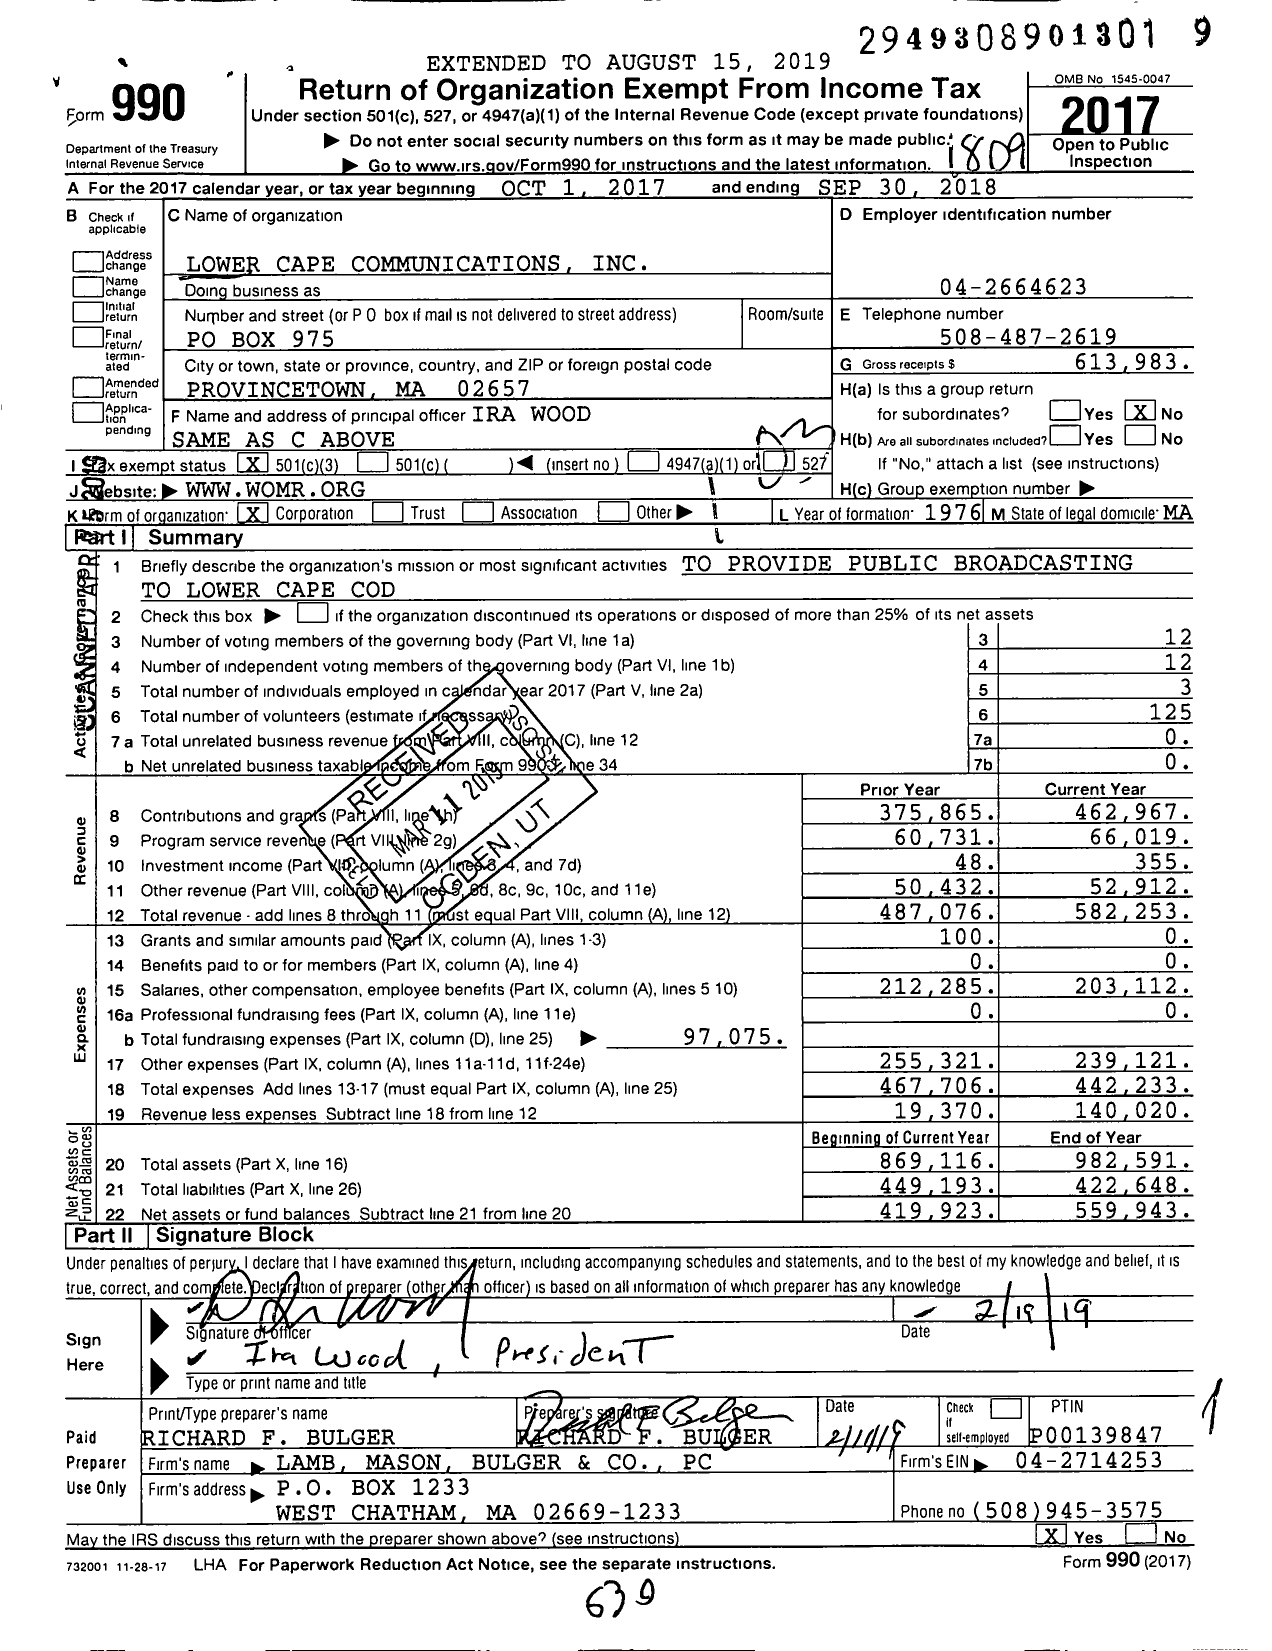 Image of first page of 2017 Form 990 for Lower Cape Communications